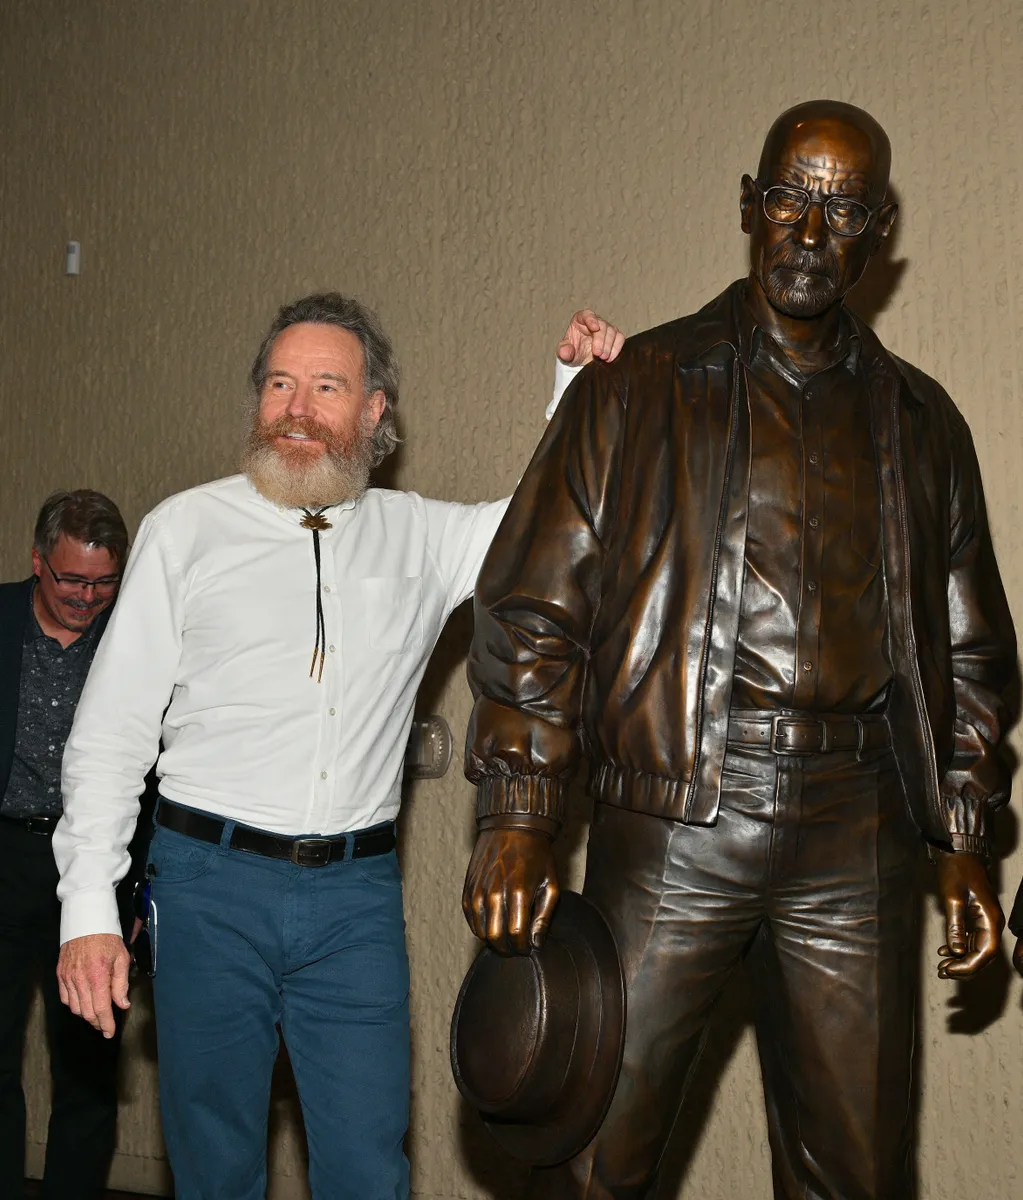 Sony Pictures Television Hosts "Breaking Bad" Statues Unveiling Featuring Bryan Cranston And Aaron Paul GettyImageRank1 Color Image arts culture and entertainment celebrities bestof topix Square Vertical 